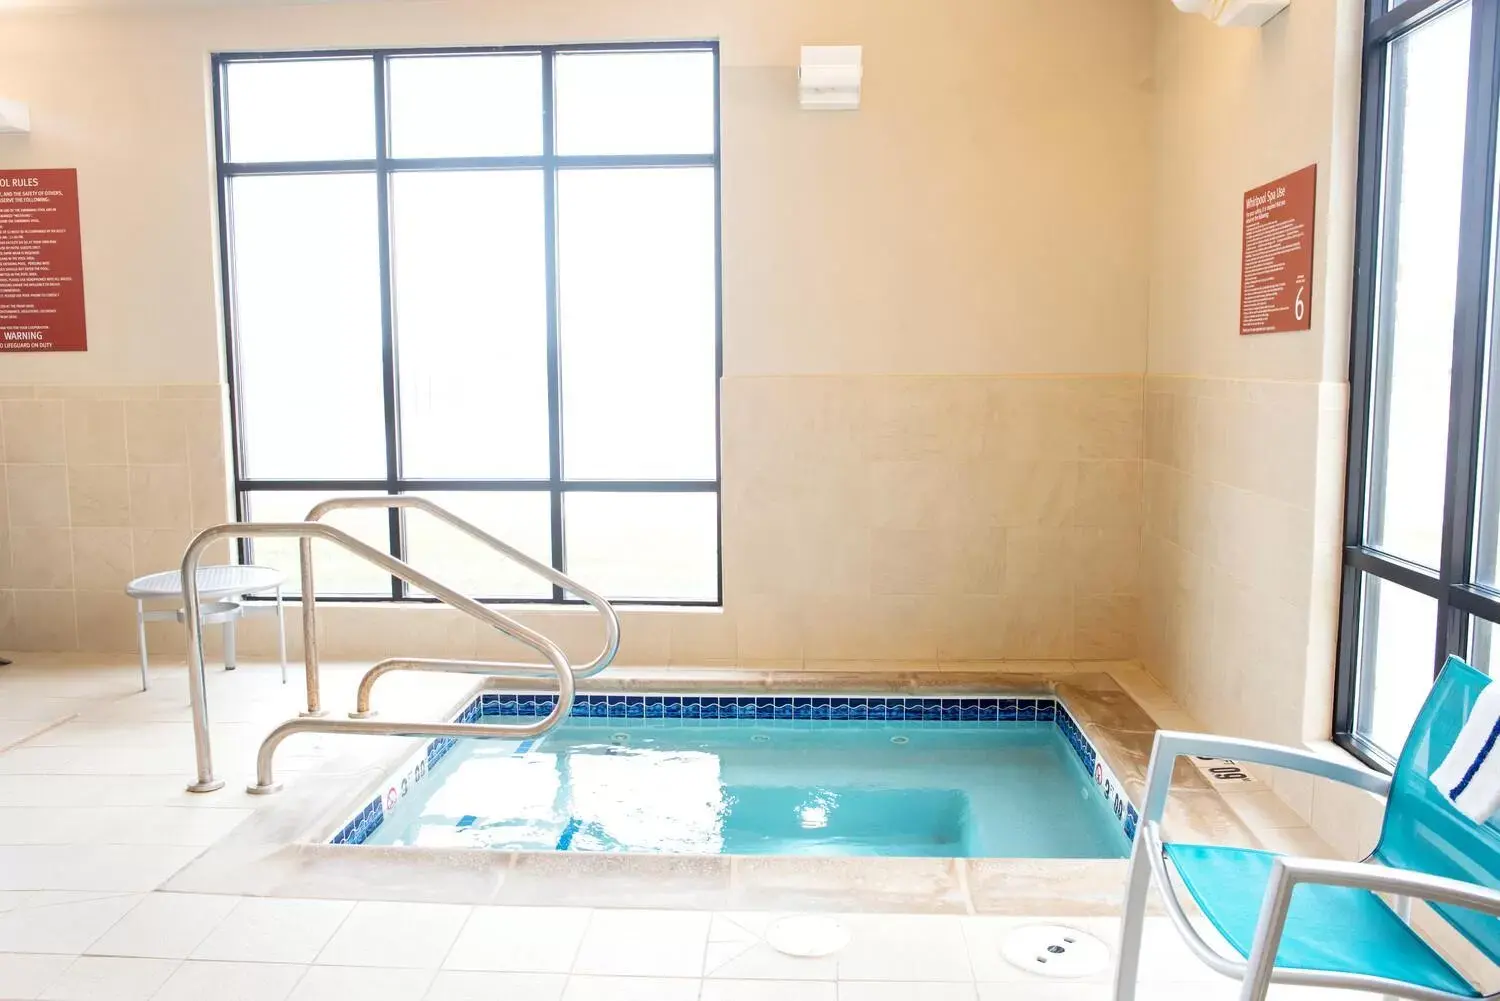 Hot Tub, Swimming Pool in TownePlace Suites by Marriott Ames